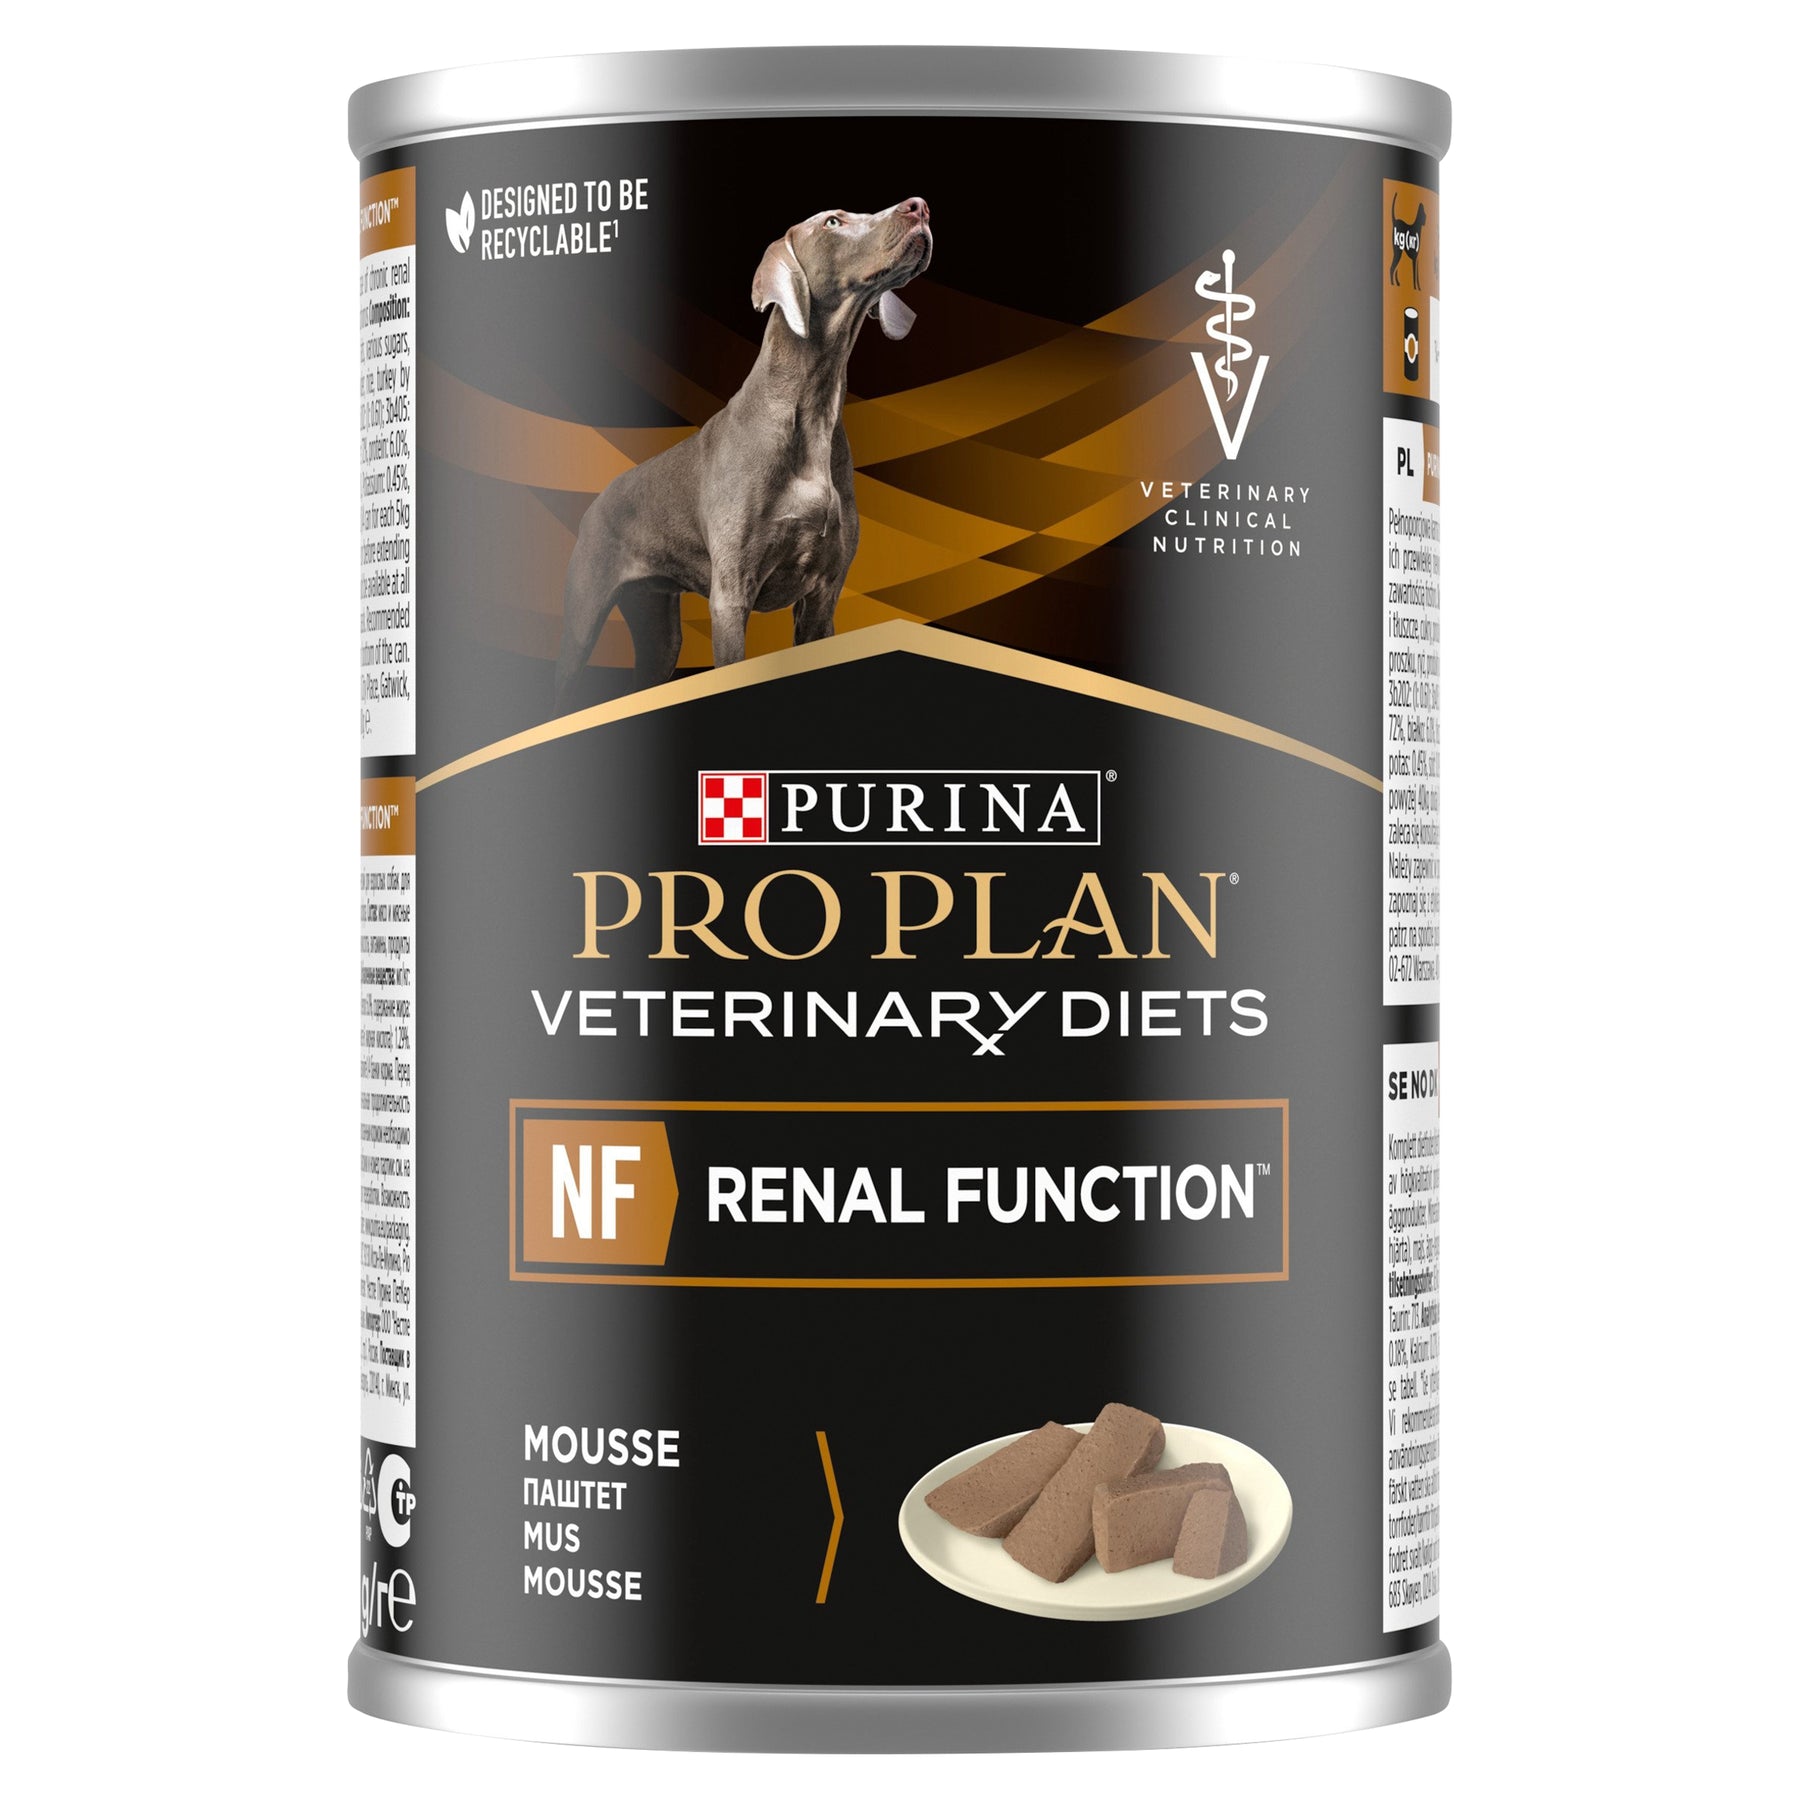 PURINA® PRO PLAN® Veterinary Diets - Canine NF Renal Function - Mousse